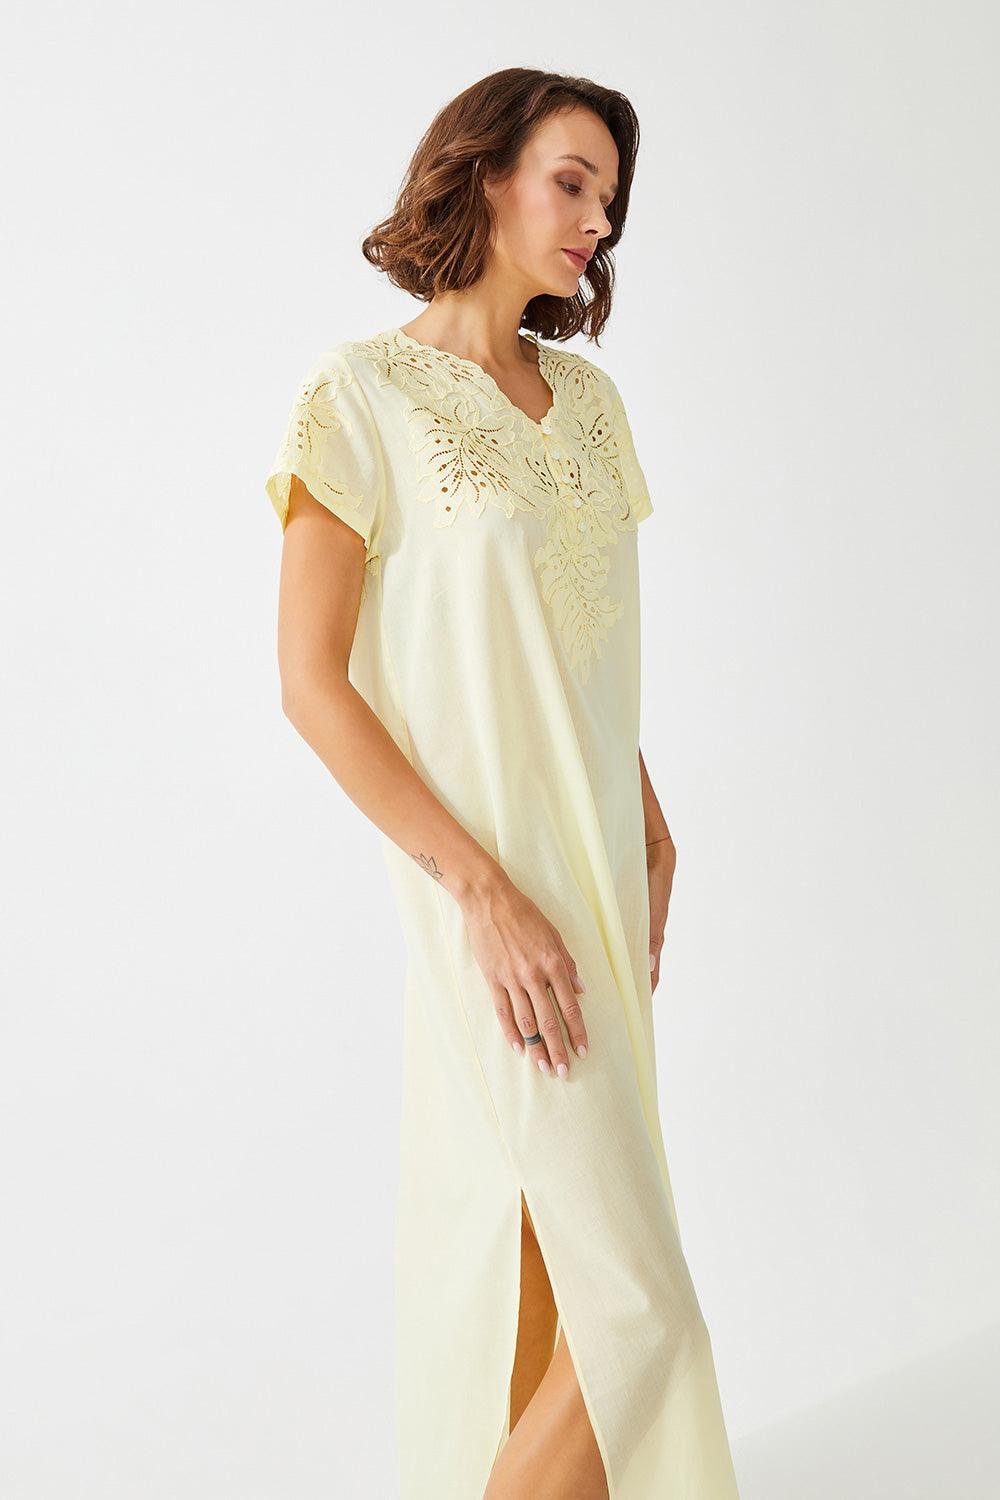 Freesia Long Cotton Voile Trimmed Half Sleeve Dress  - Baby Yellow - Bocan